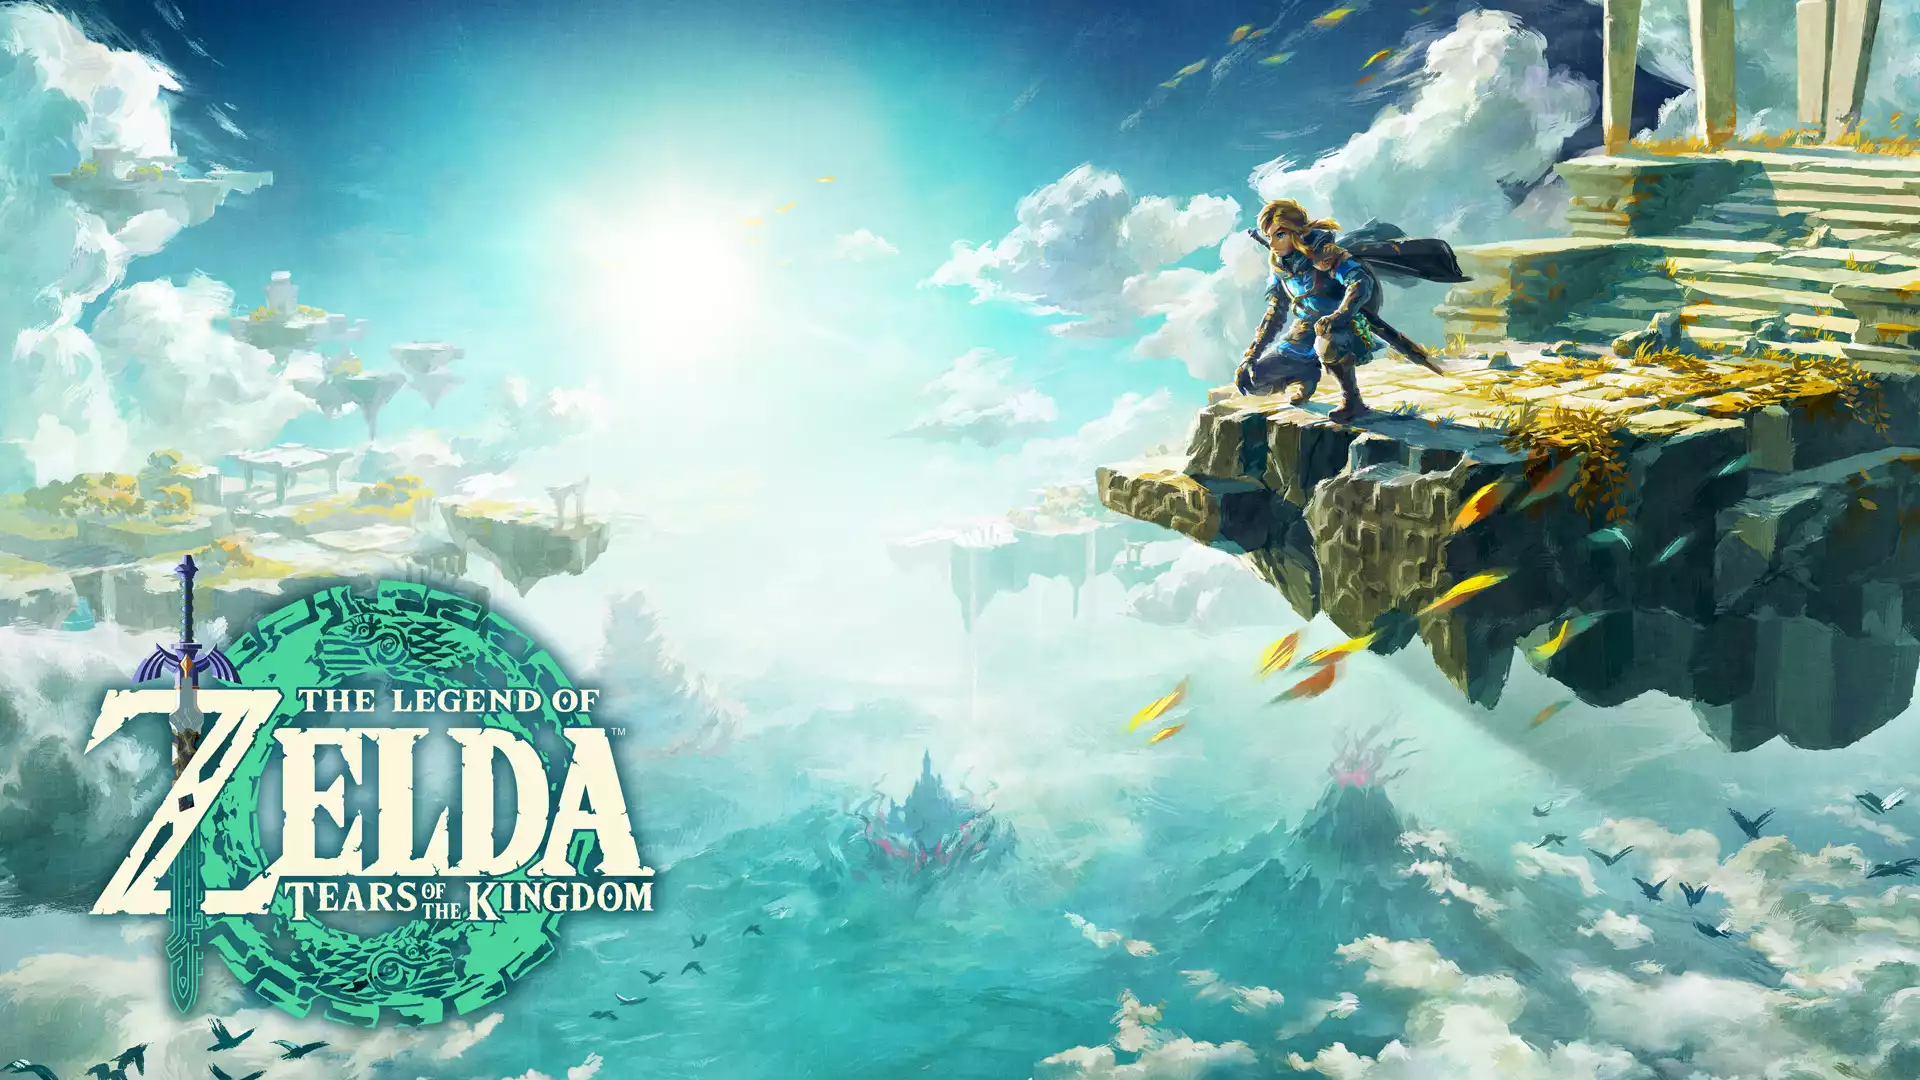 The Legend Of Zelda: Tears Of The Kingdom: Release date, gameplay, trailers, and more